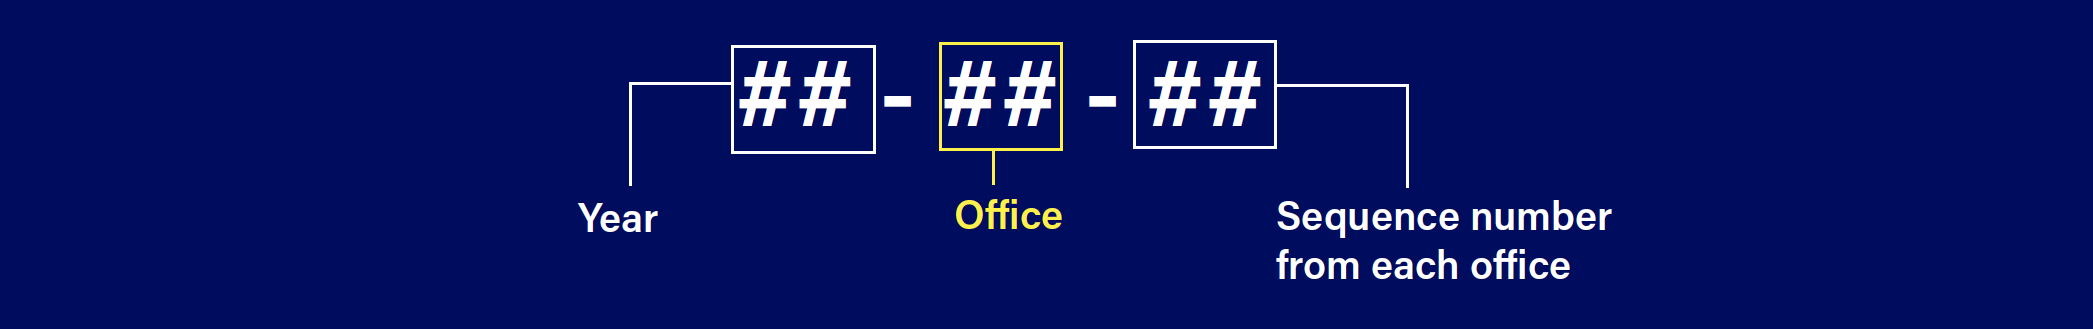 sequence number from each office